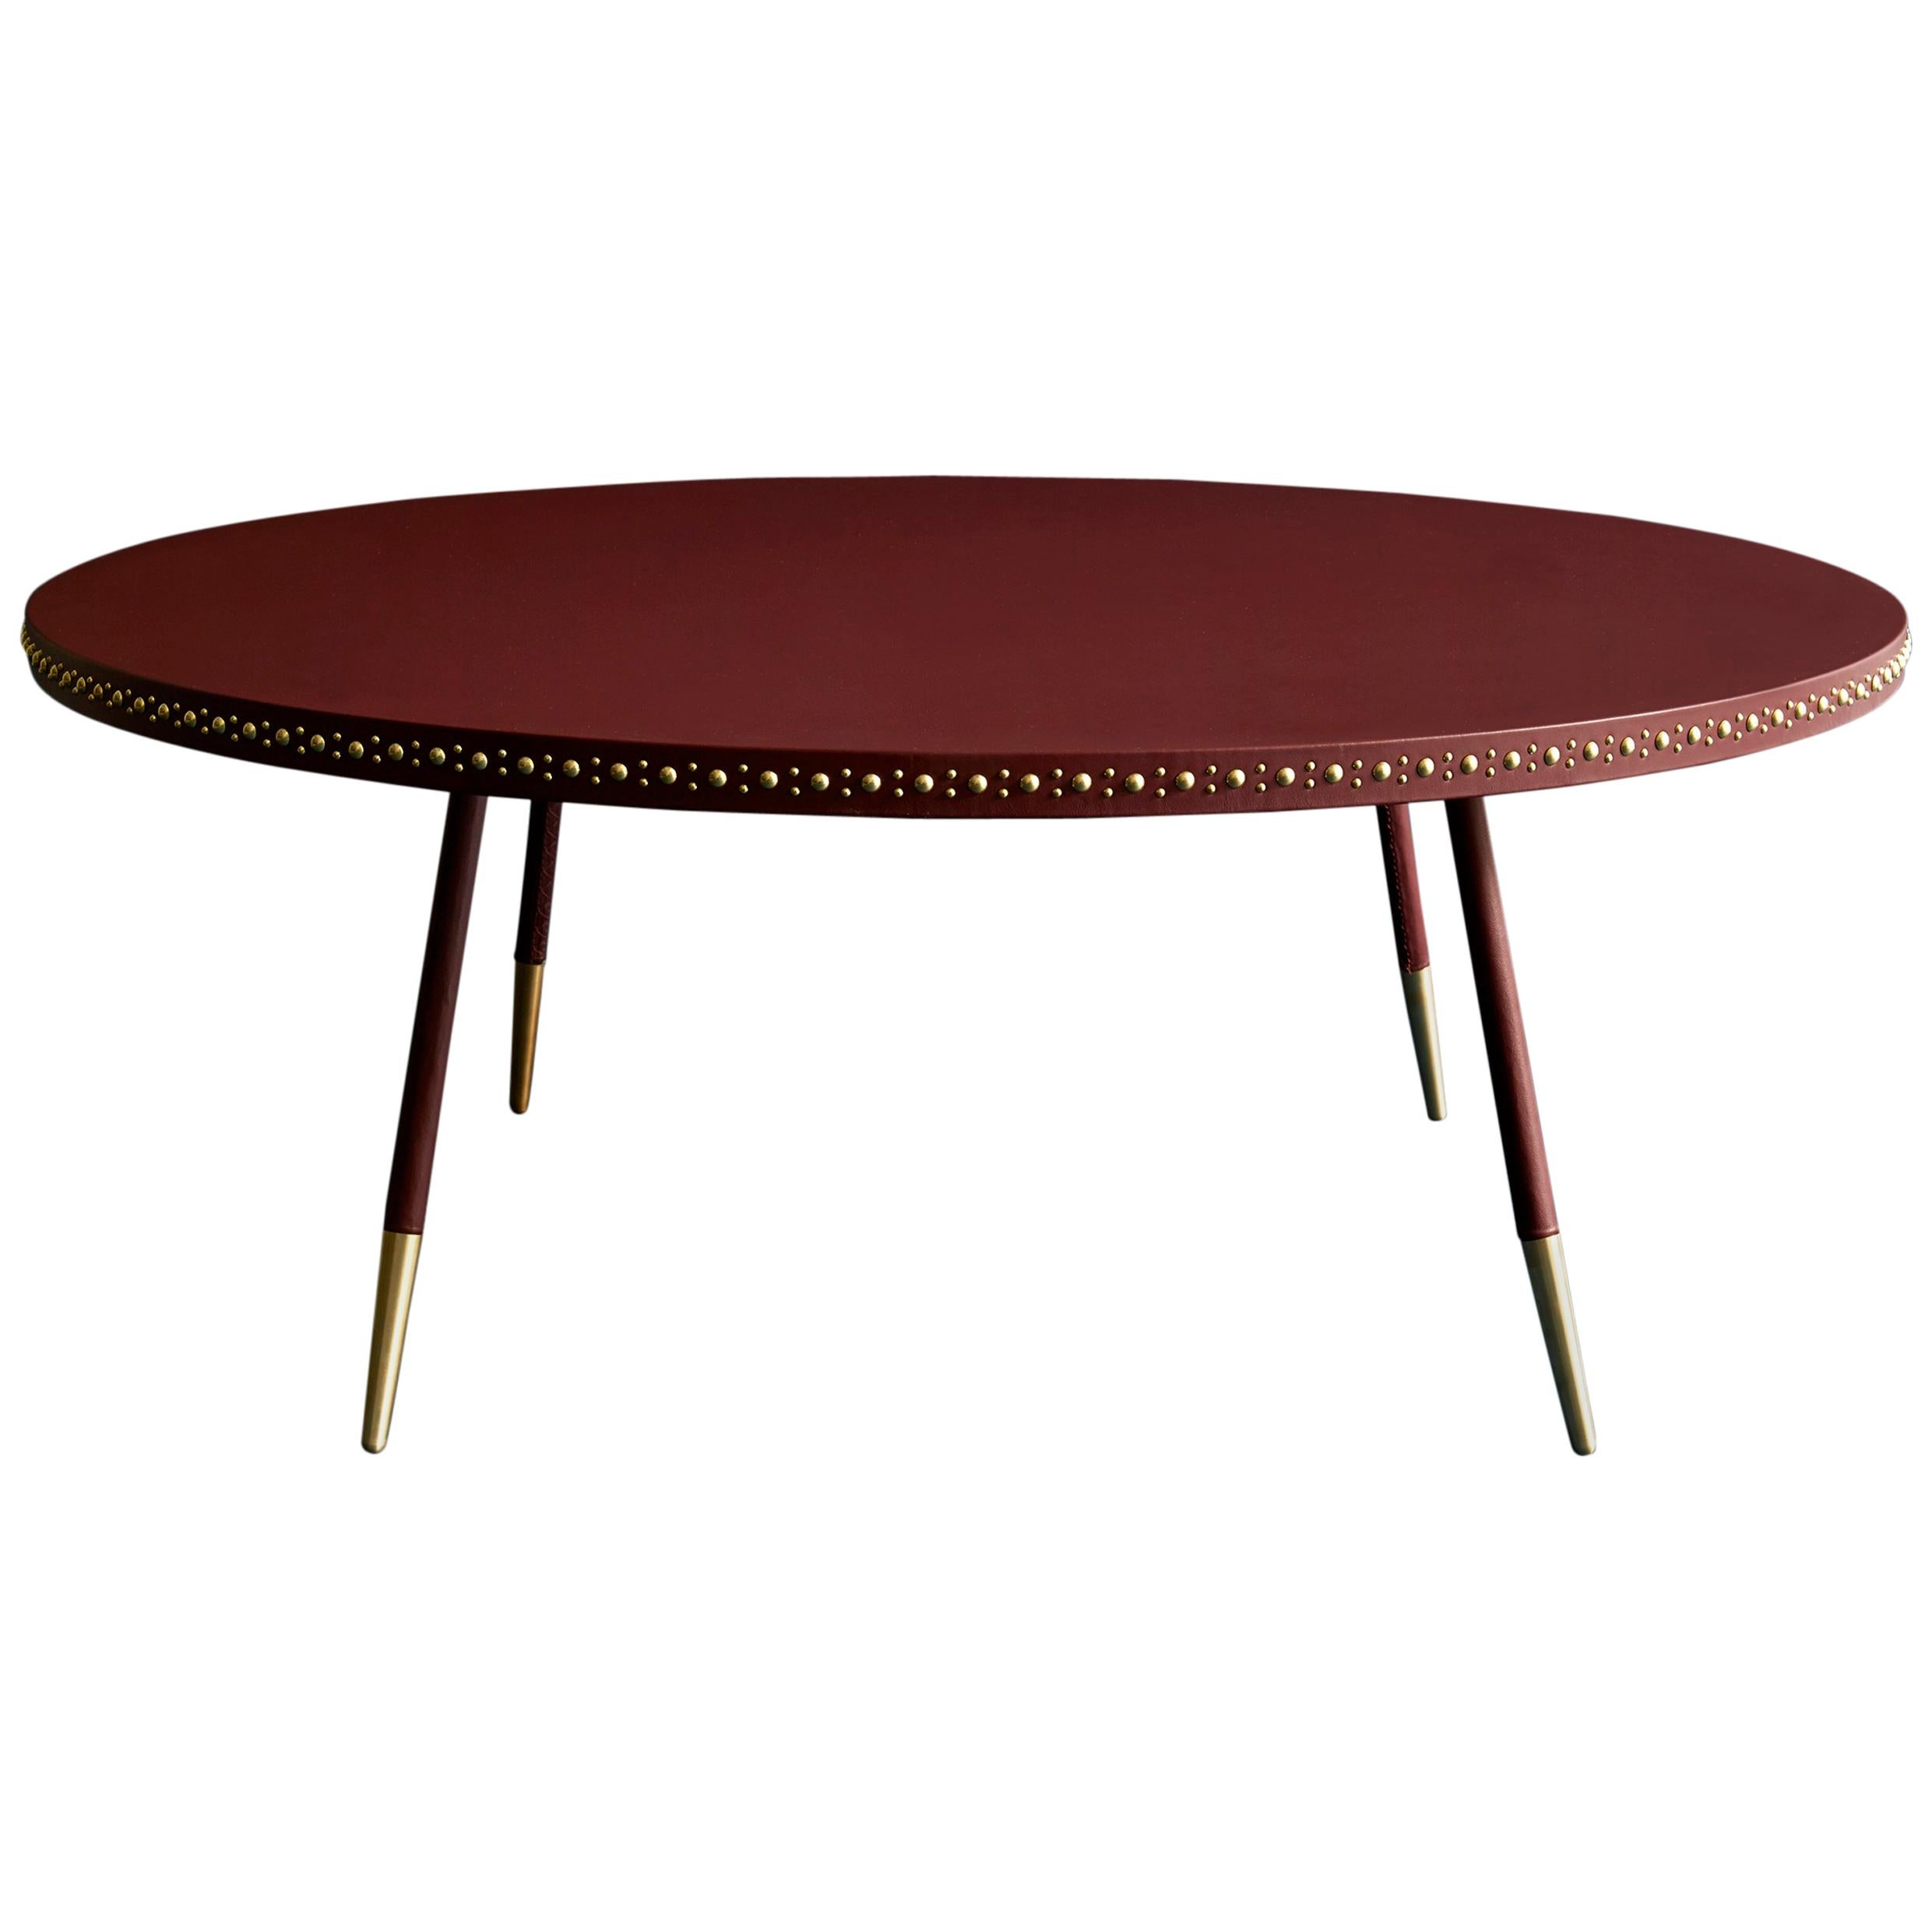 Bethan Gray Leather Stud Coffee Table in Wine and Brass